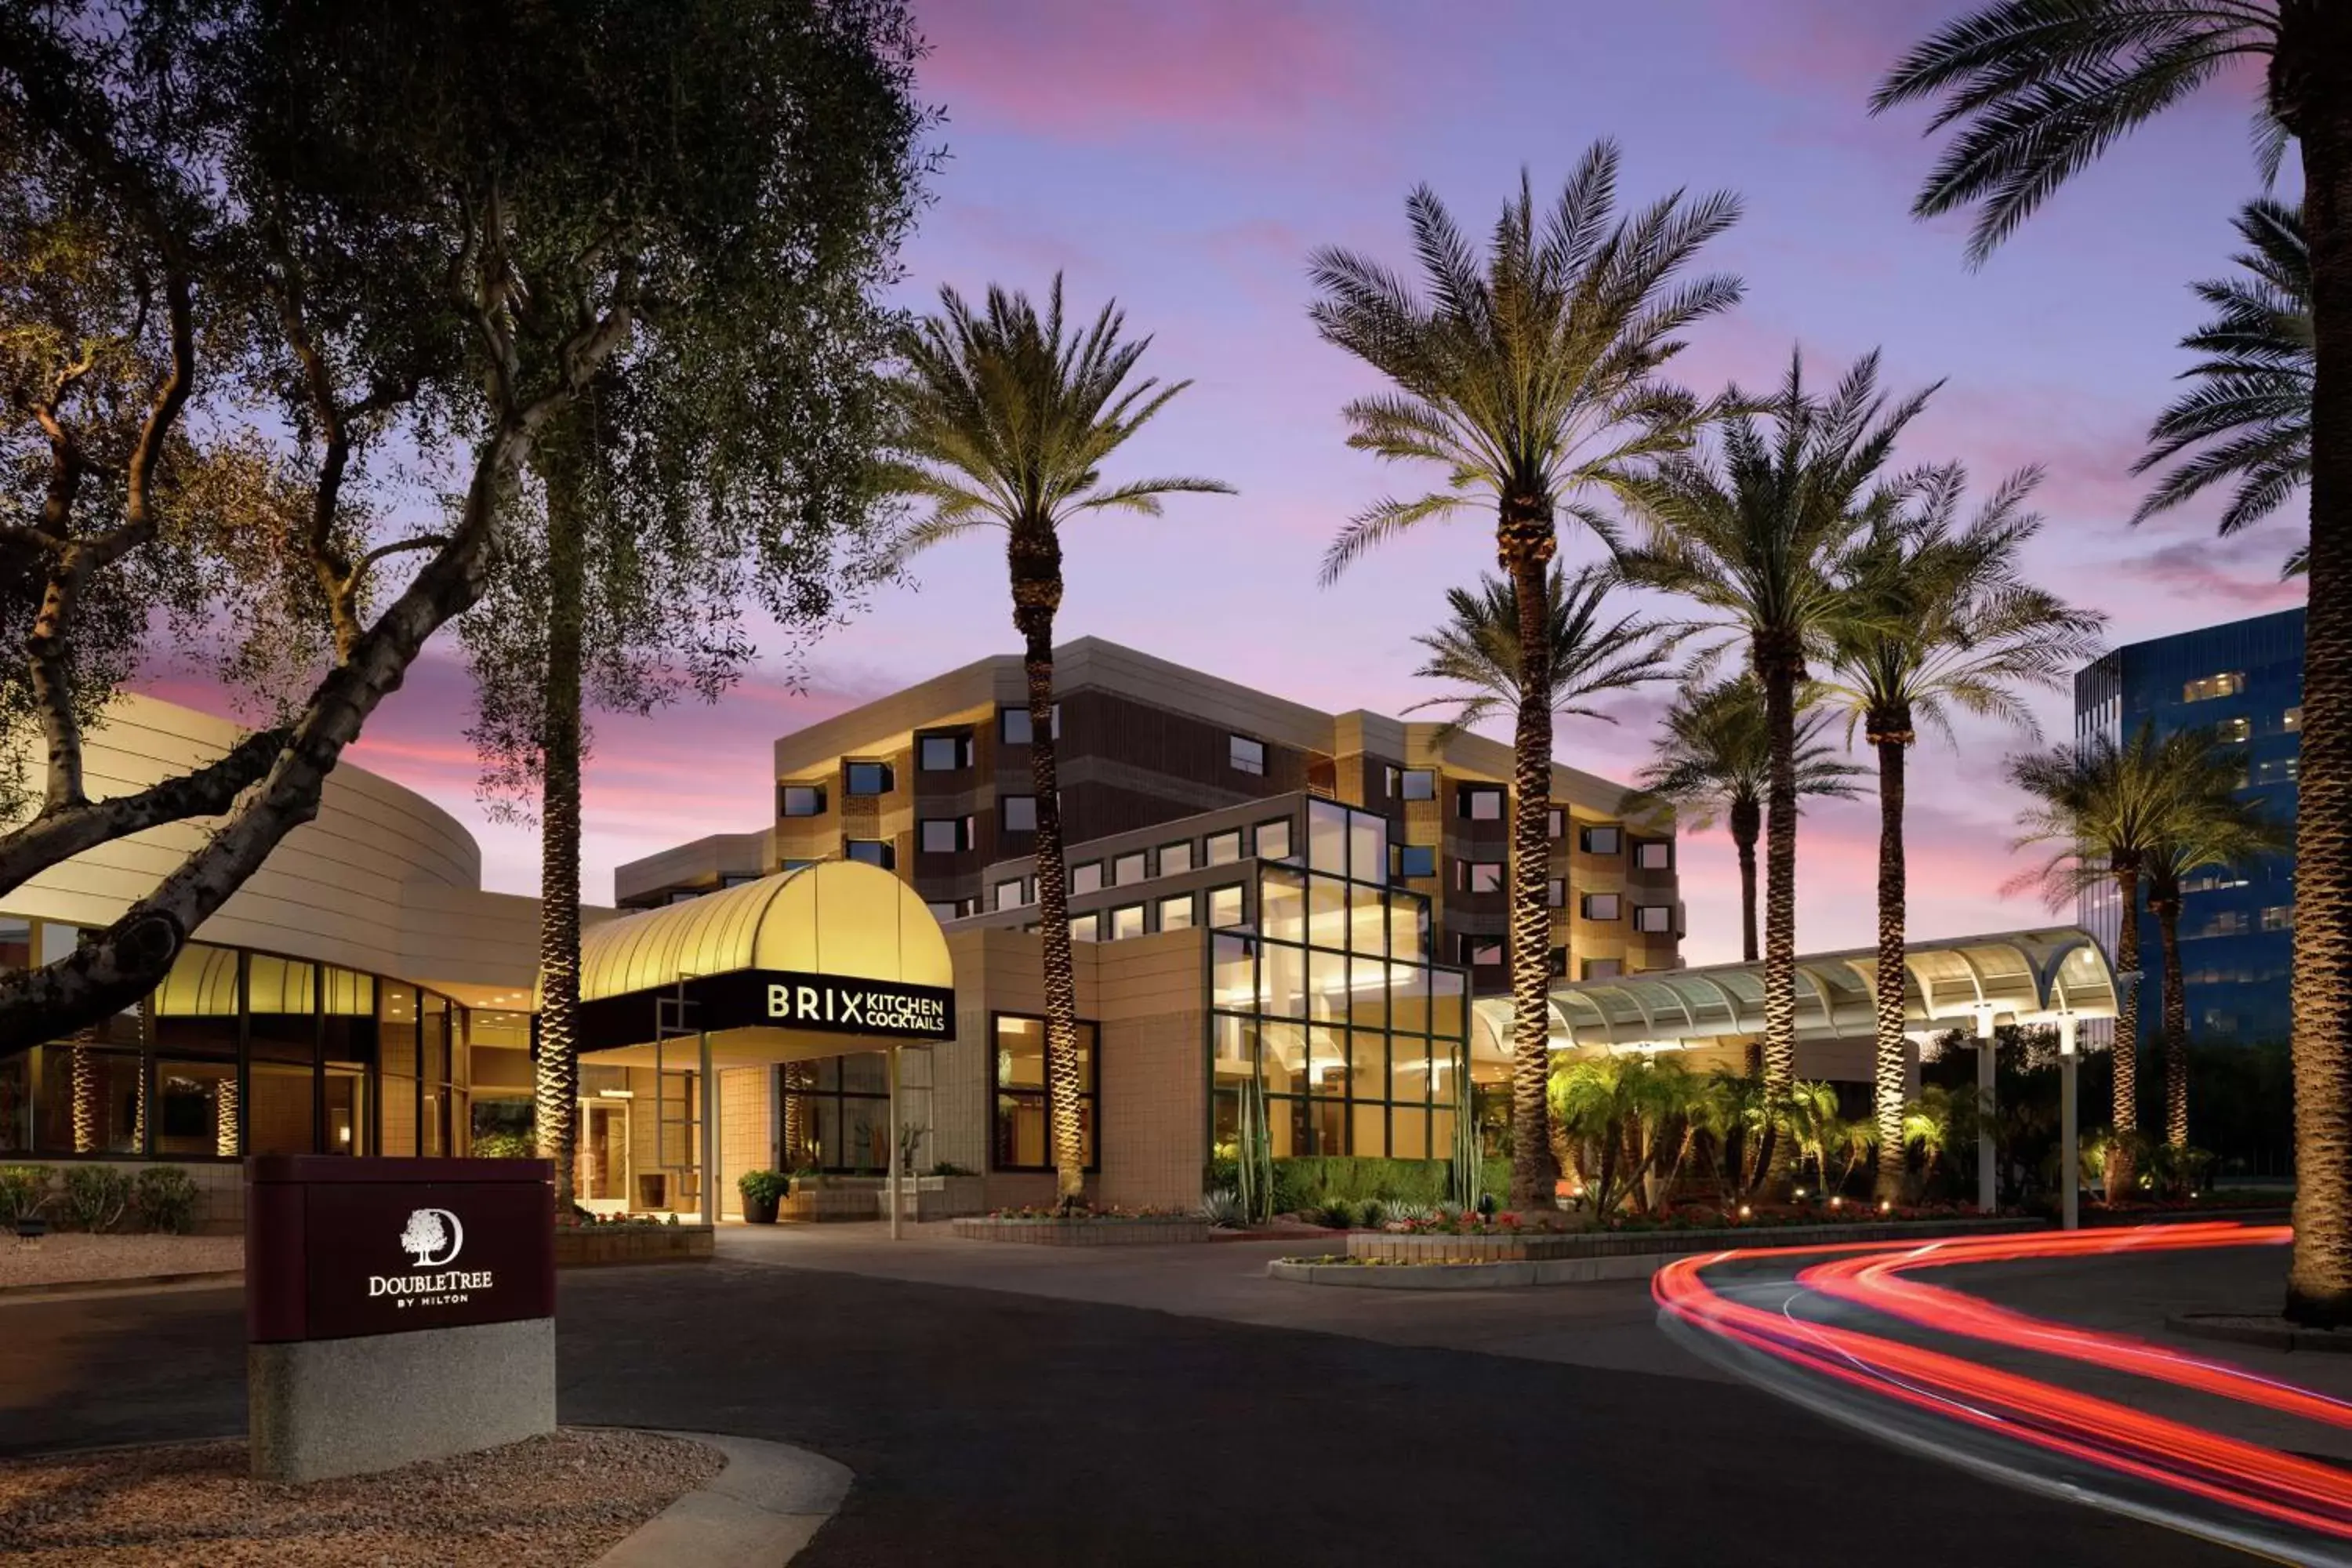 Property Building in DoubleTree Suites by Hilton Phoenix